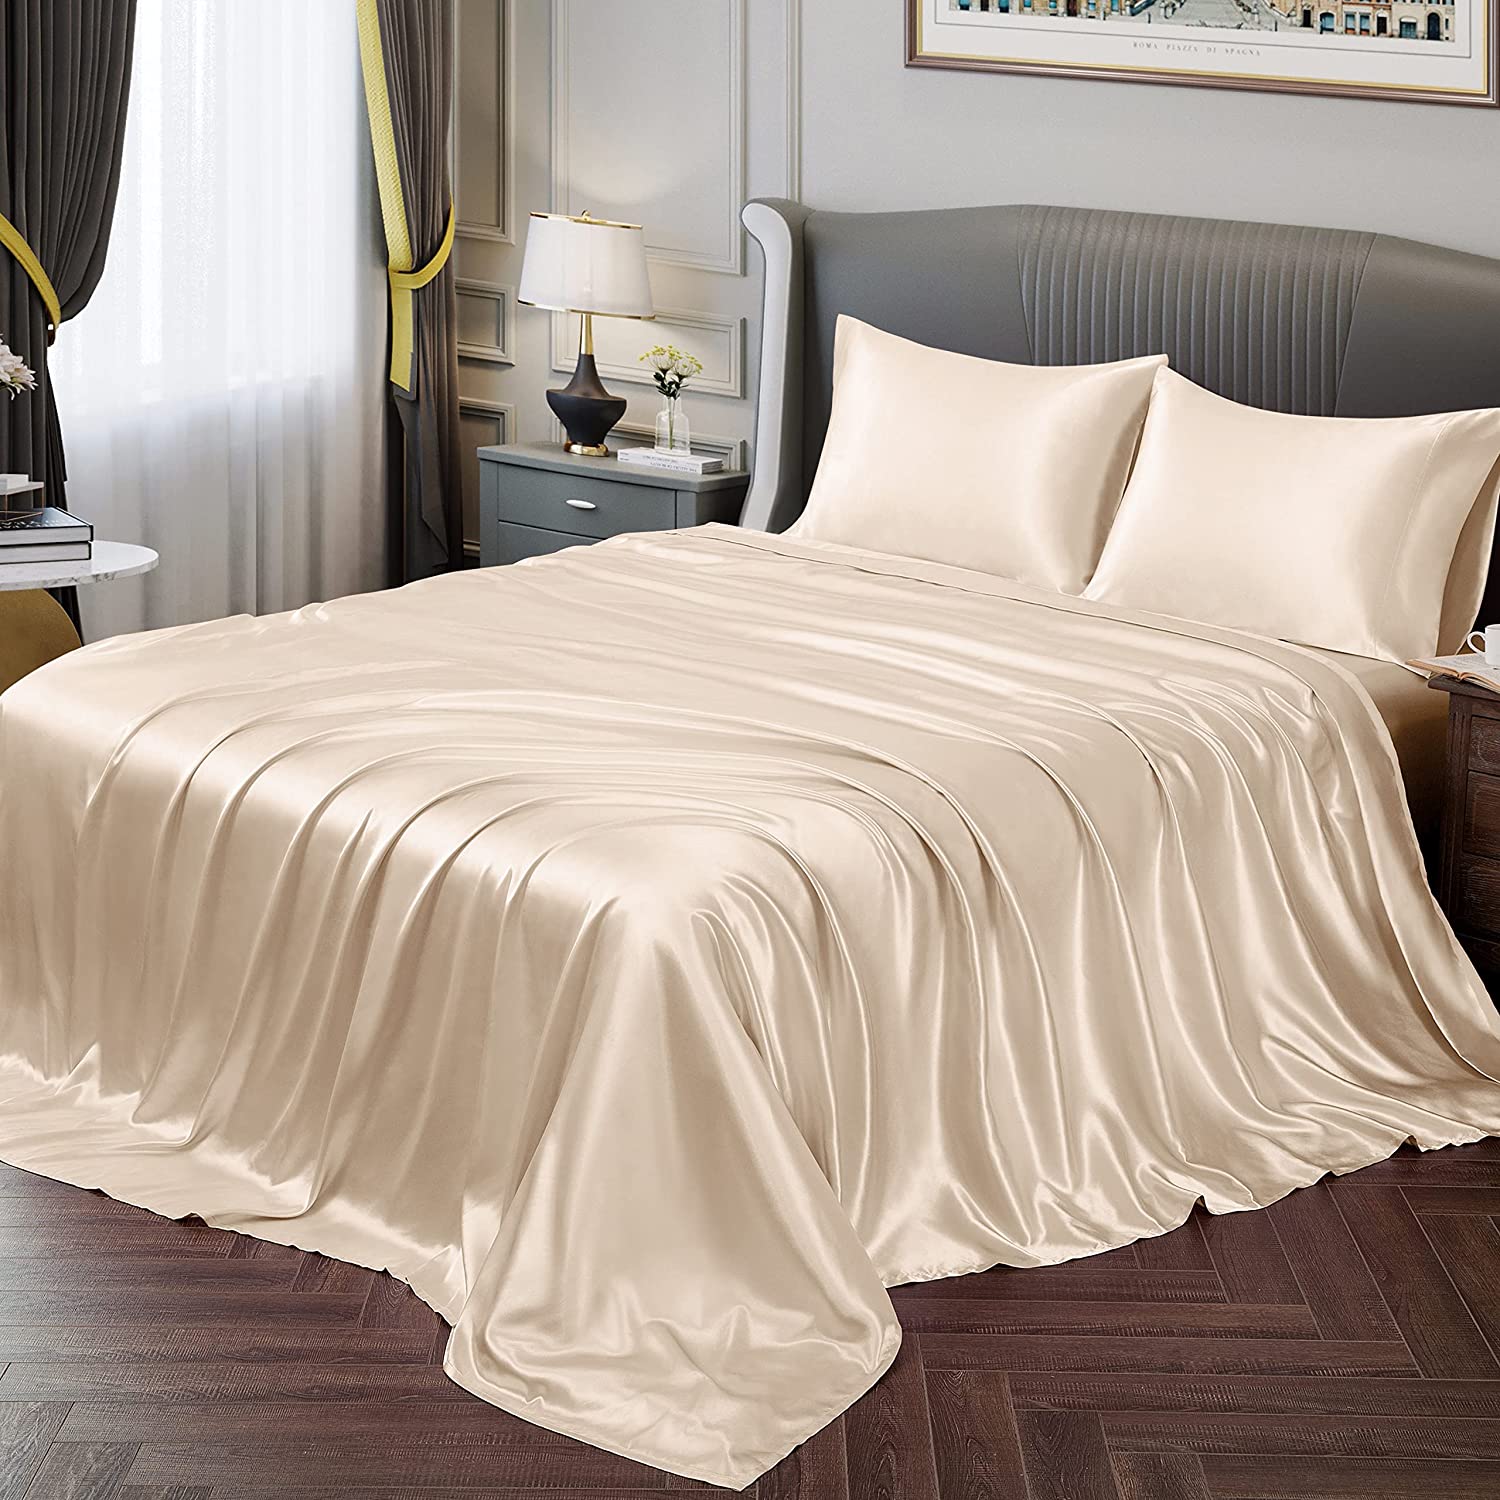 New 1 Pc Bed Sheet Solid Color Plain Dyed Satin Polyester Flat Sheets Queen  Size Sabanas Cama 90 Single Top Sheets